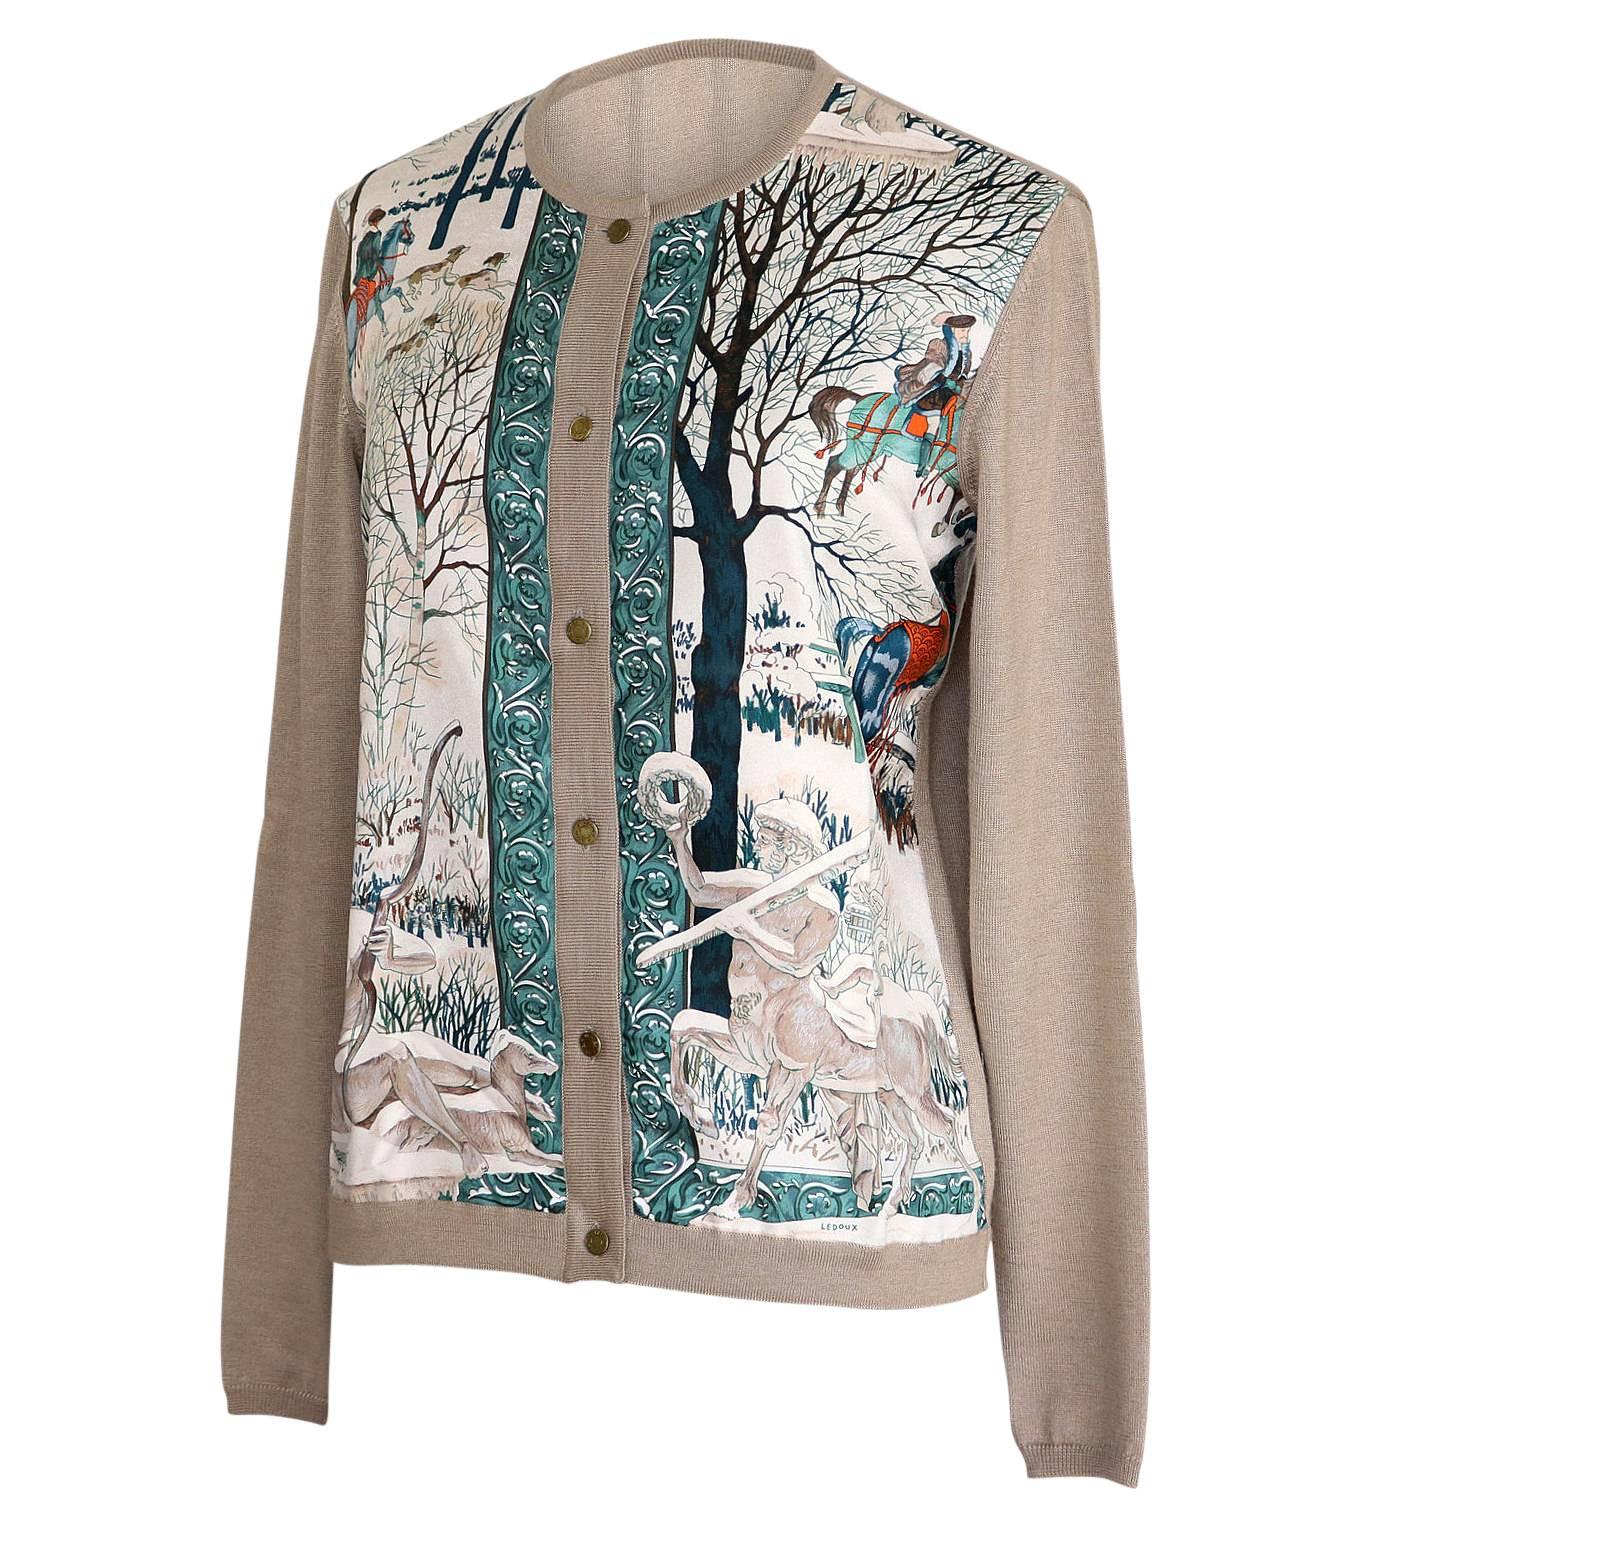 Mightychic offers an Hermes L'Hiver by Philippe Ledoux coveted scarf print twinset cardigan sweater and knit shell. 
The beautiful scarf print is in shades of teal, taupe and a touch of orange.
Rear of sweater is taupe cashmere and silk.
6 burnished